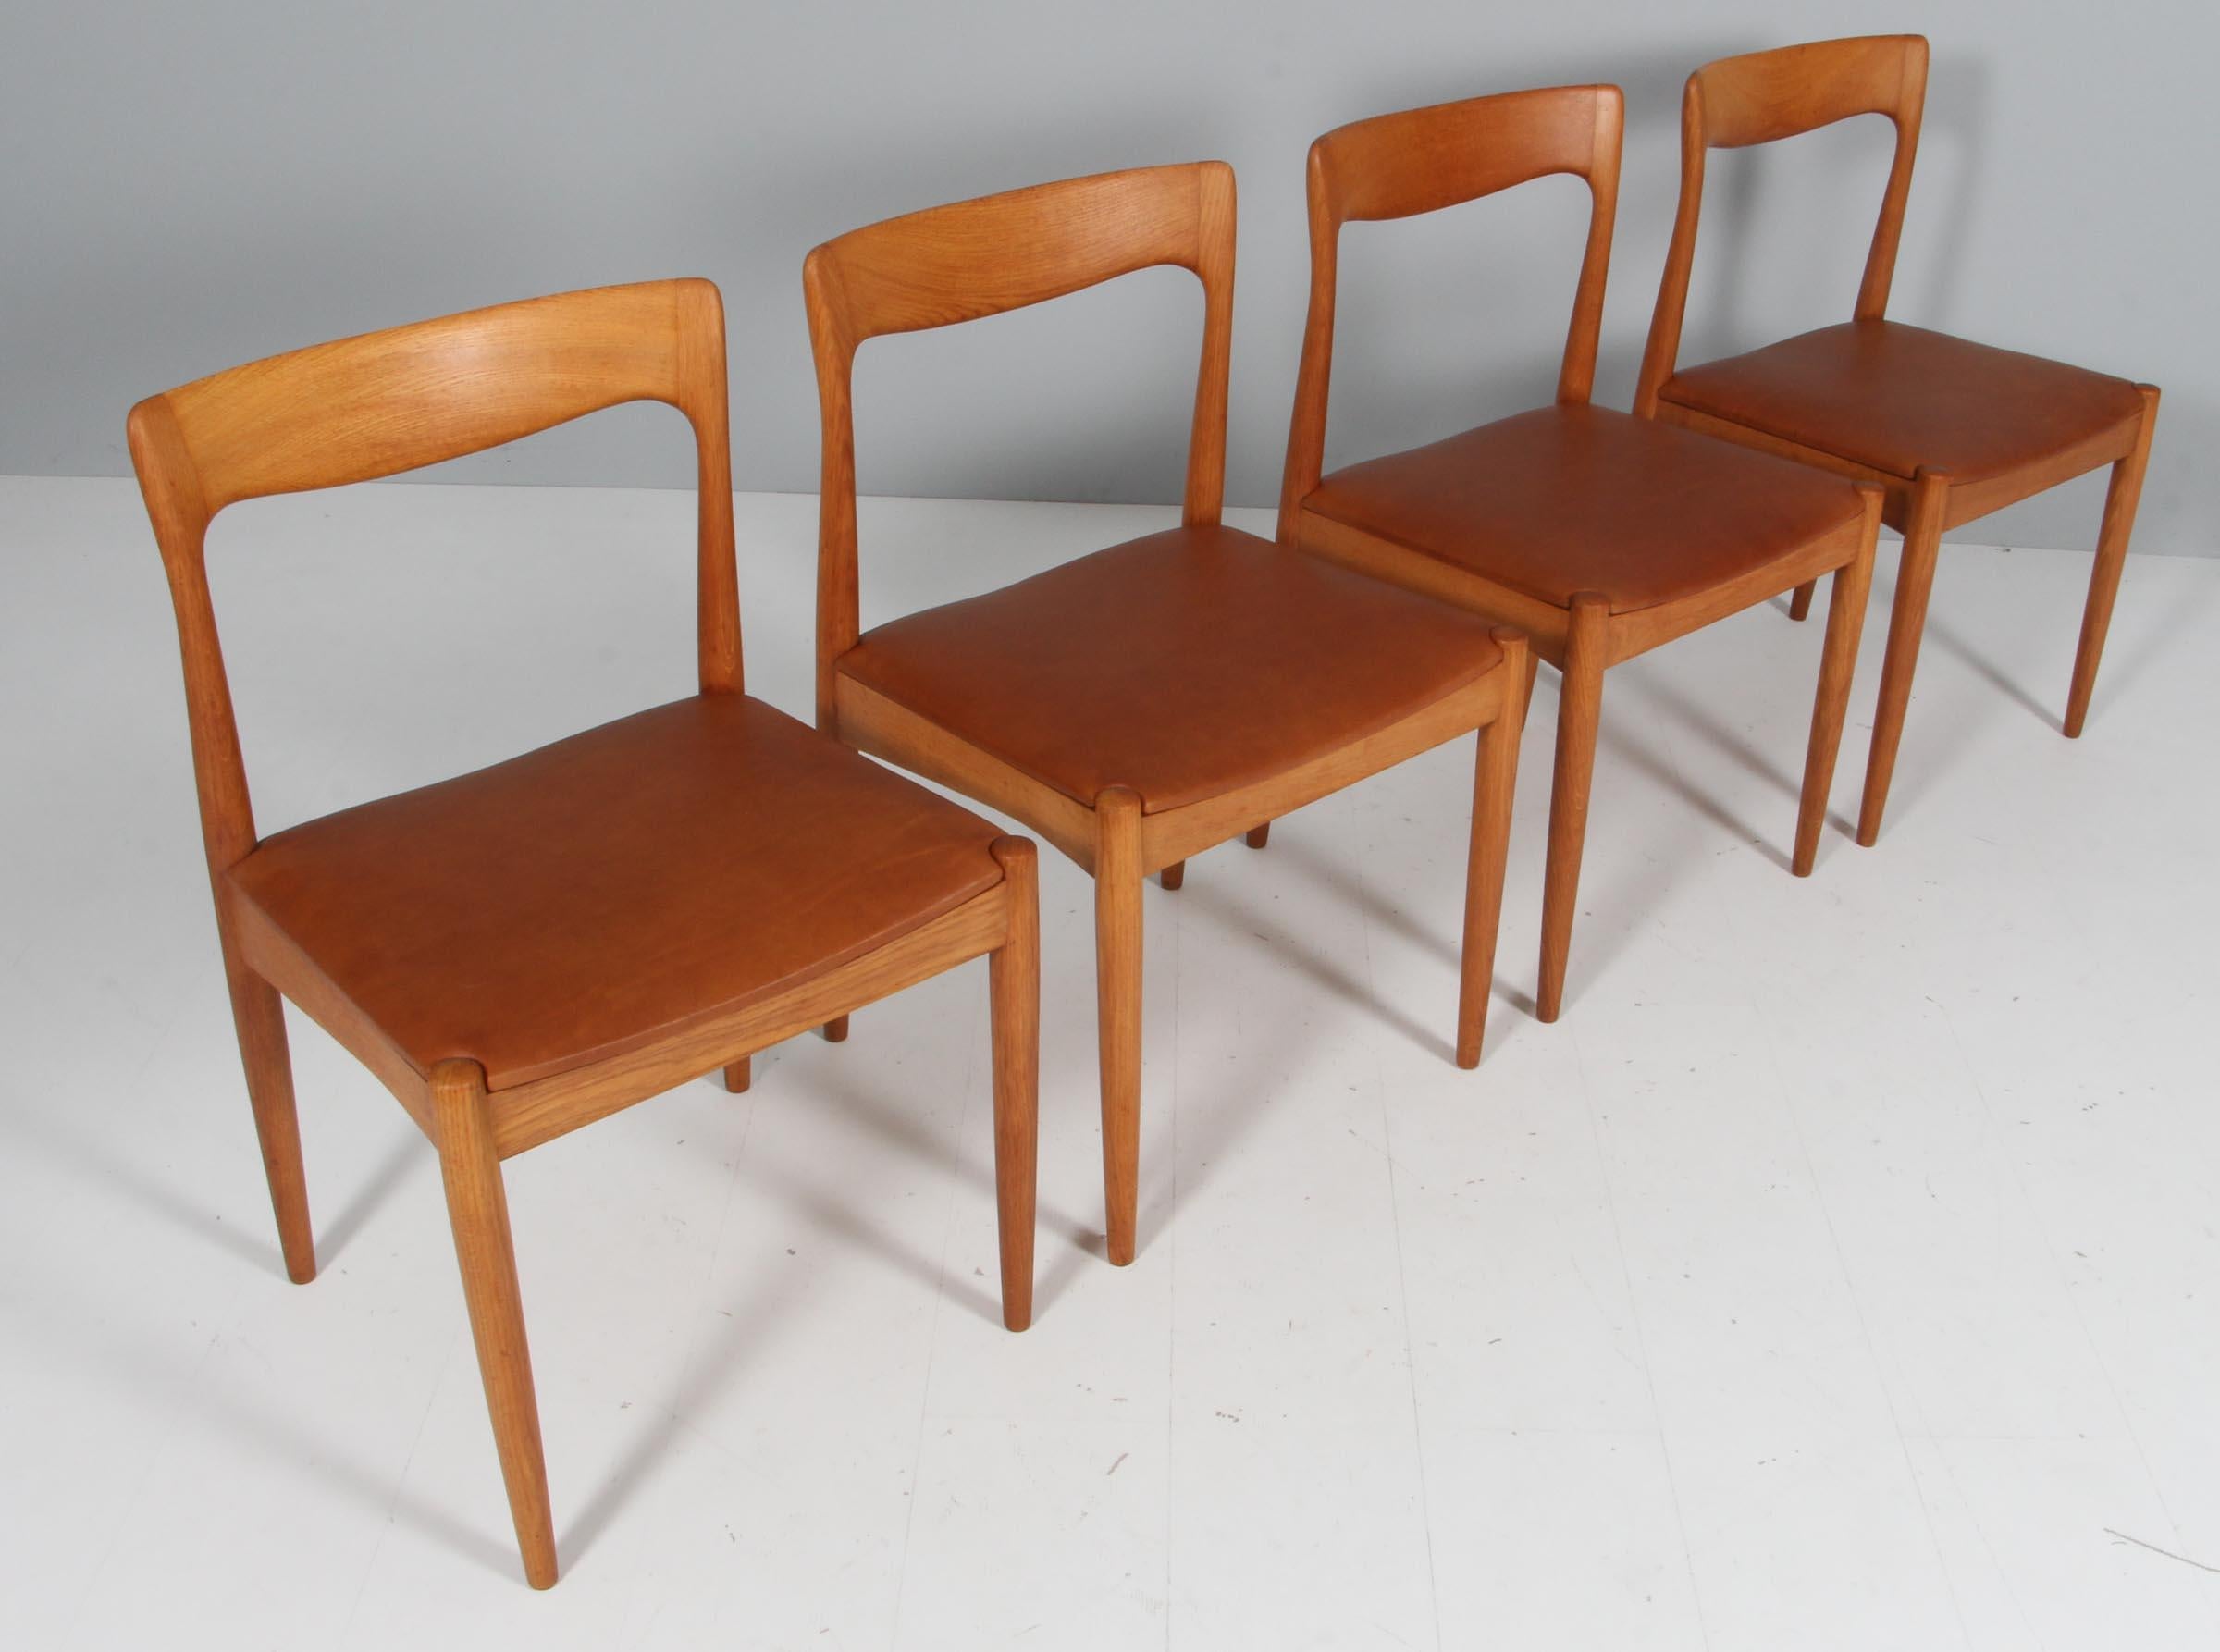 Set of four Arne Vodder dining chairs in solid oak.

New upholstered seats with tan aniline leather.

Made by Vamo.